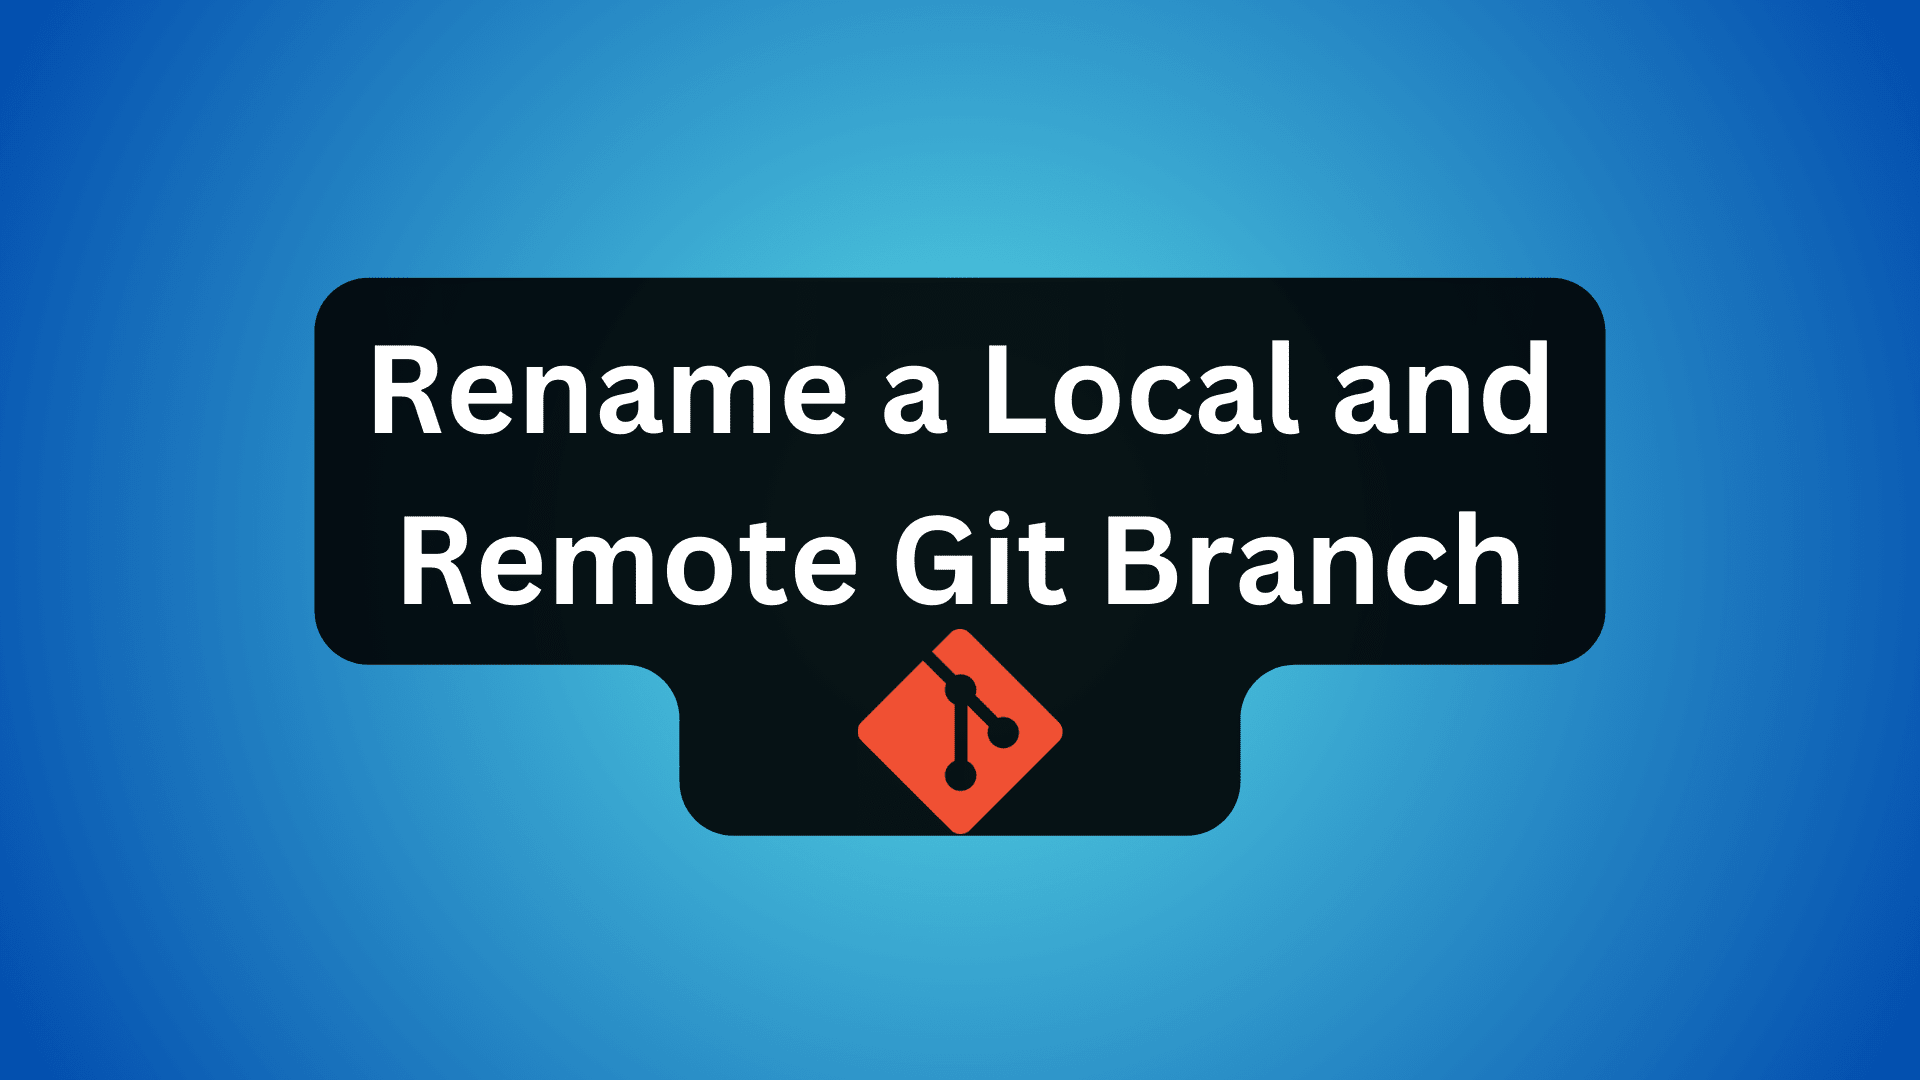 Step-by-step guide on renaming local and remote Git branches